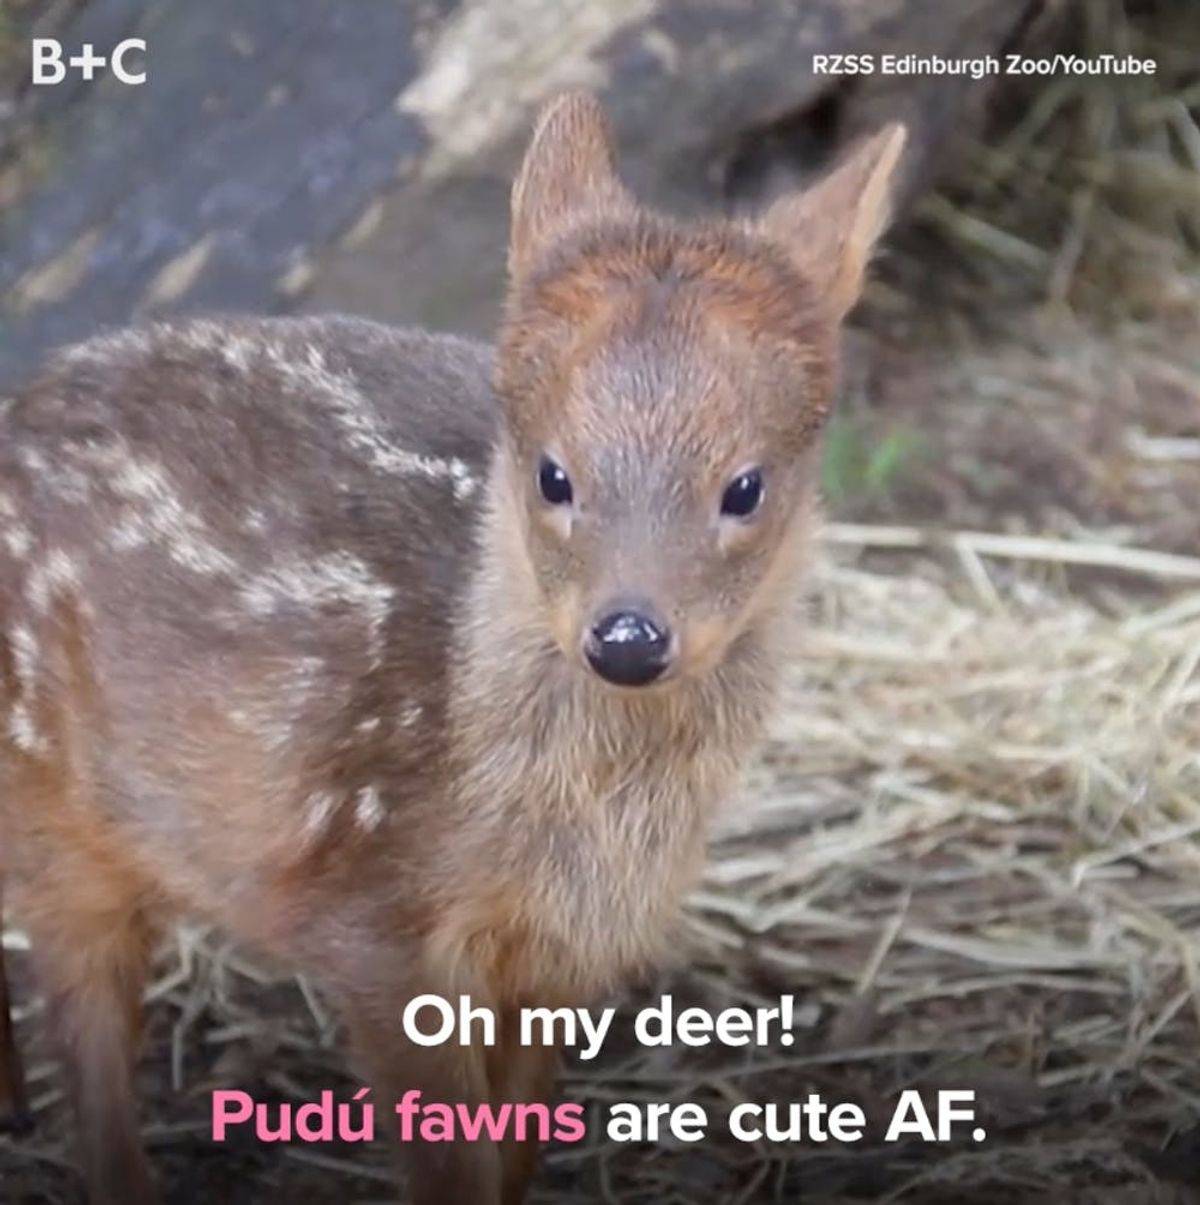 The World’s Smallest Deer Is Too Cute For Words